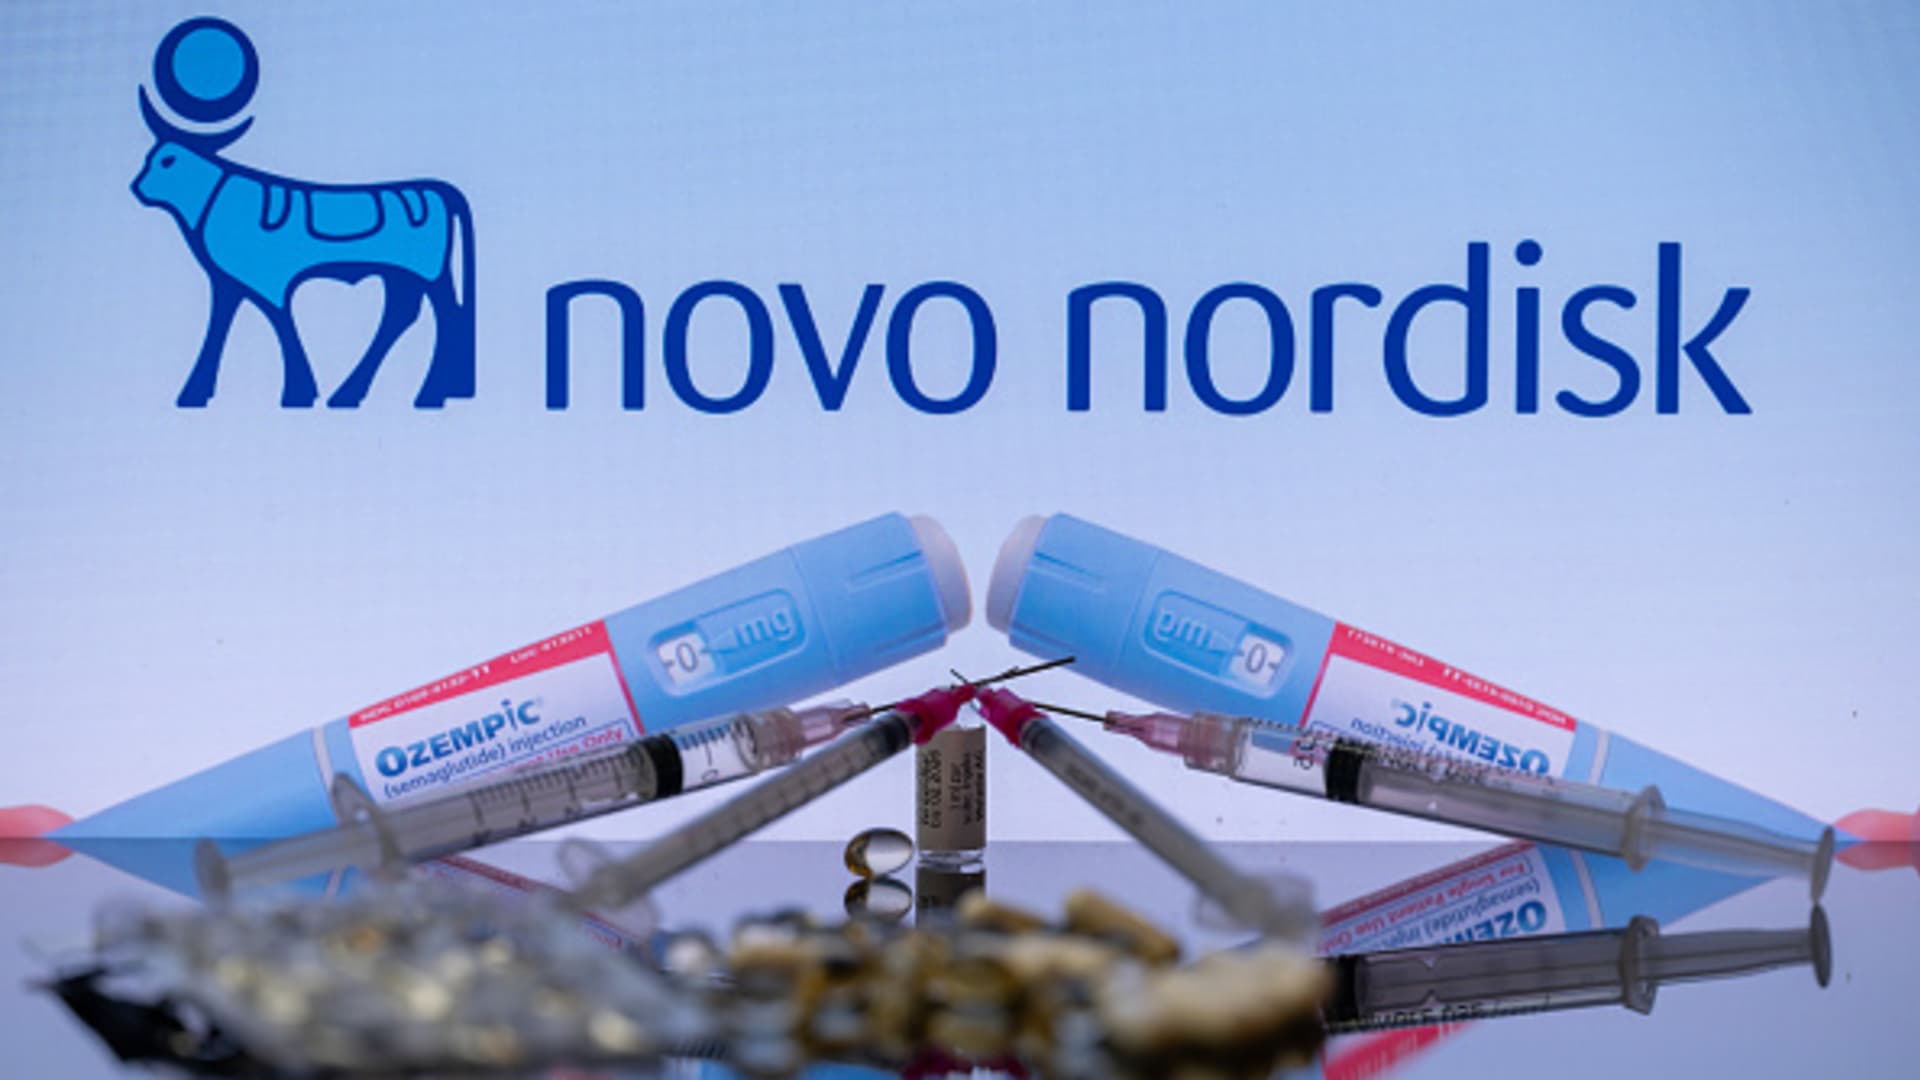 
Novo Nordisk's Joint Venture Strategy: How It Leads To Success